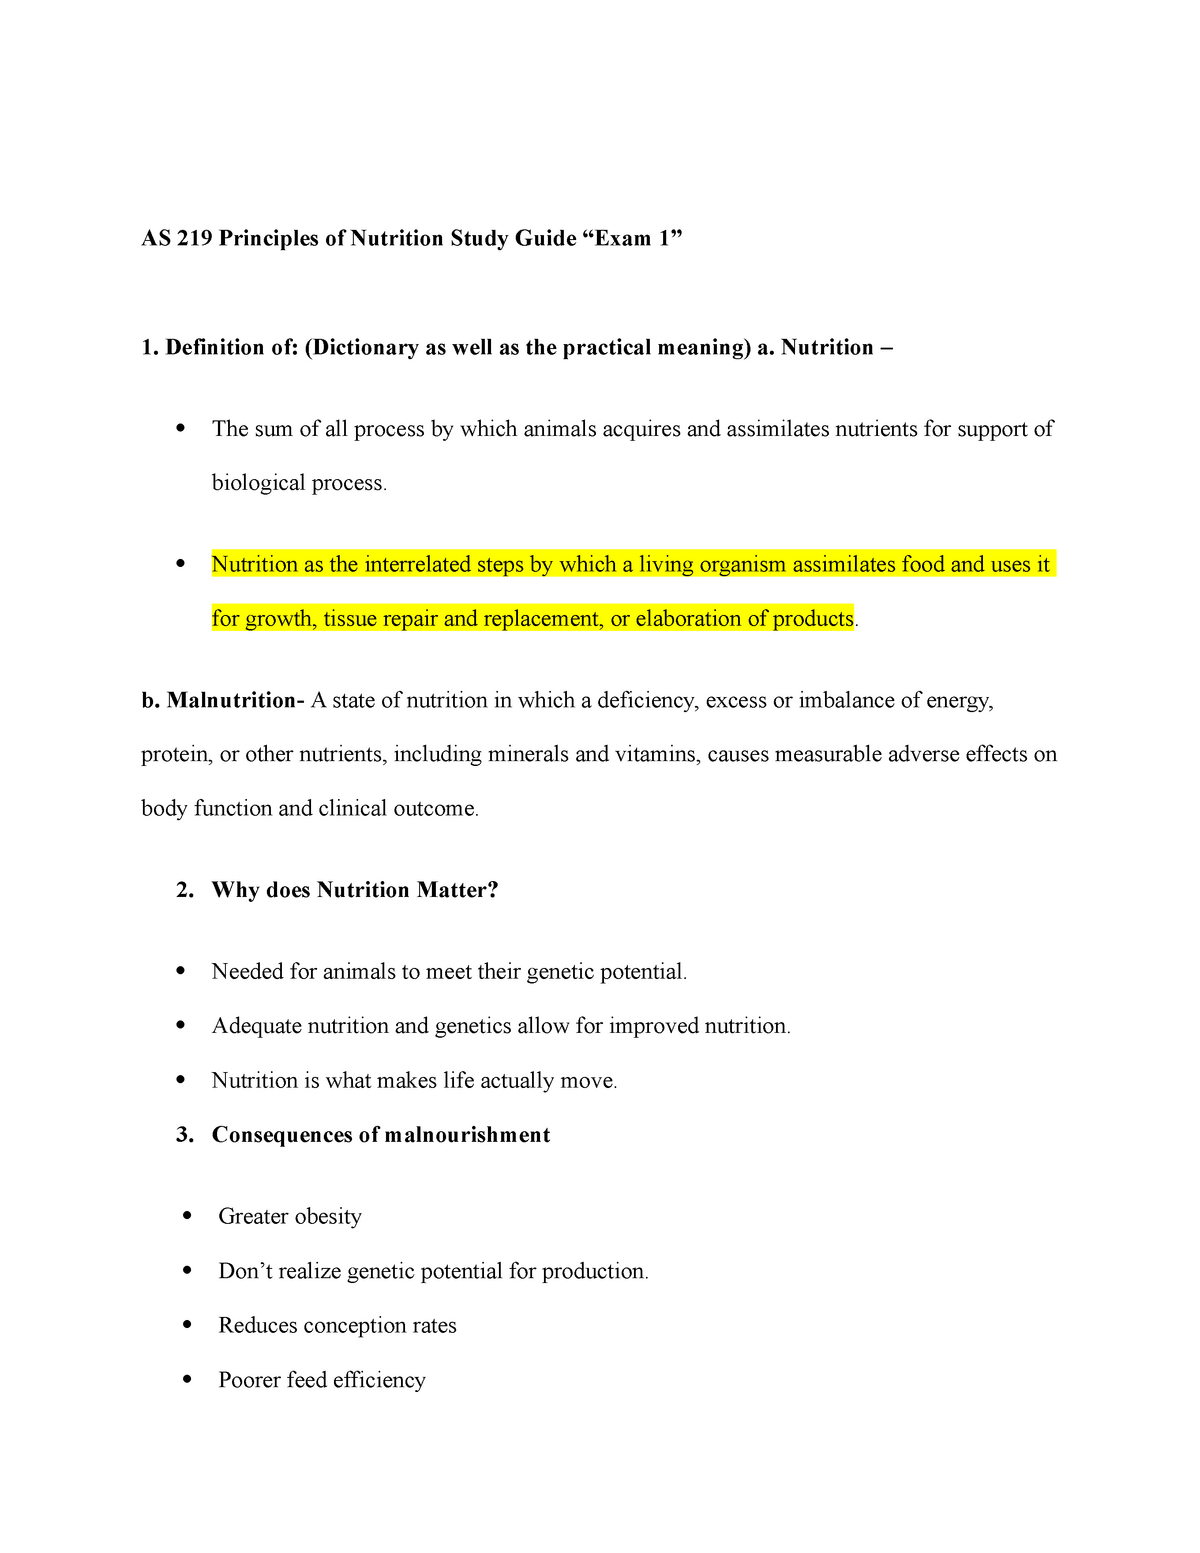 Principles of Animal Nutrition Study Guide Exam 1 - AS 219 Principles of  Nutrition Study Guide “Exam - Studocu